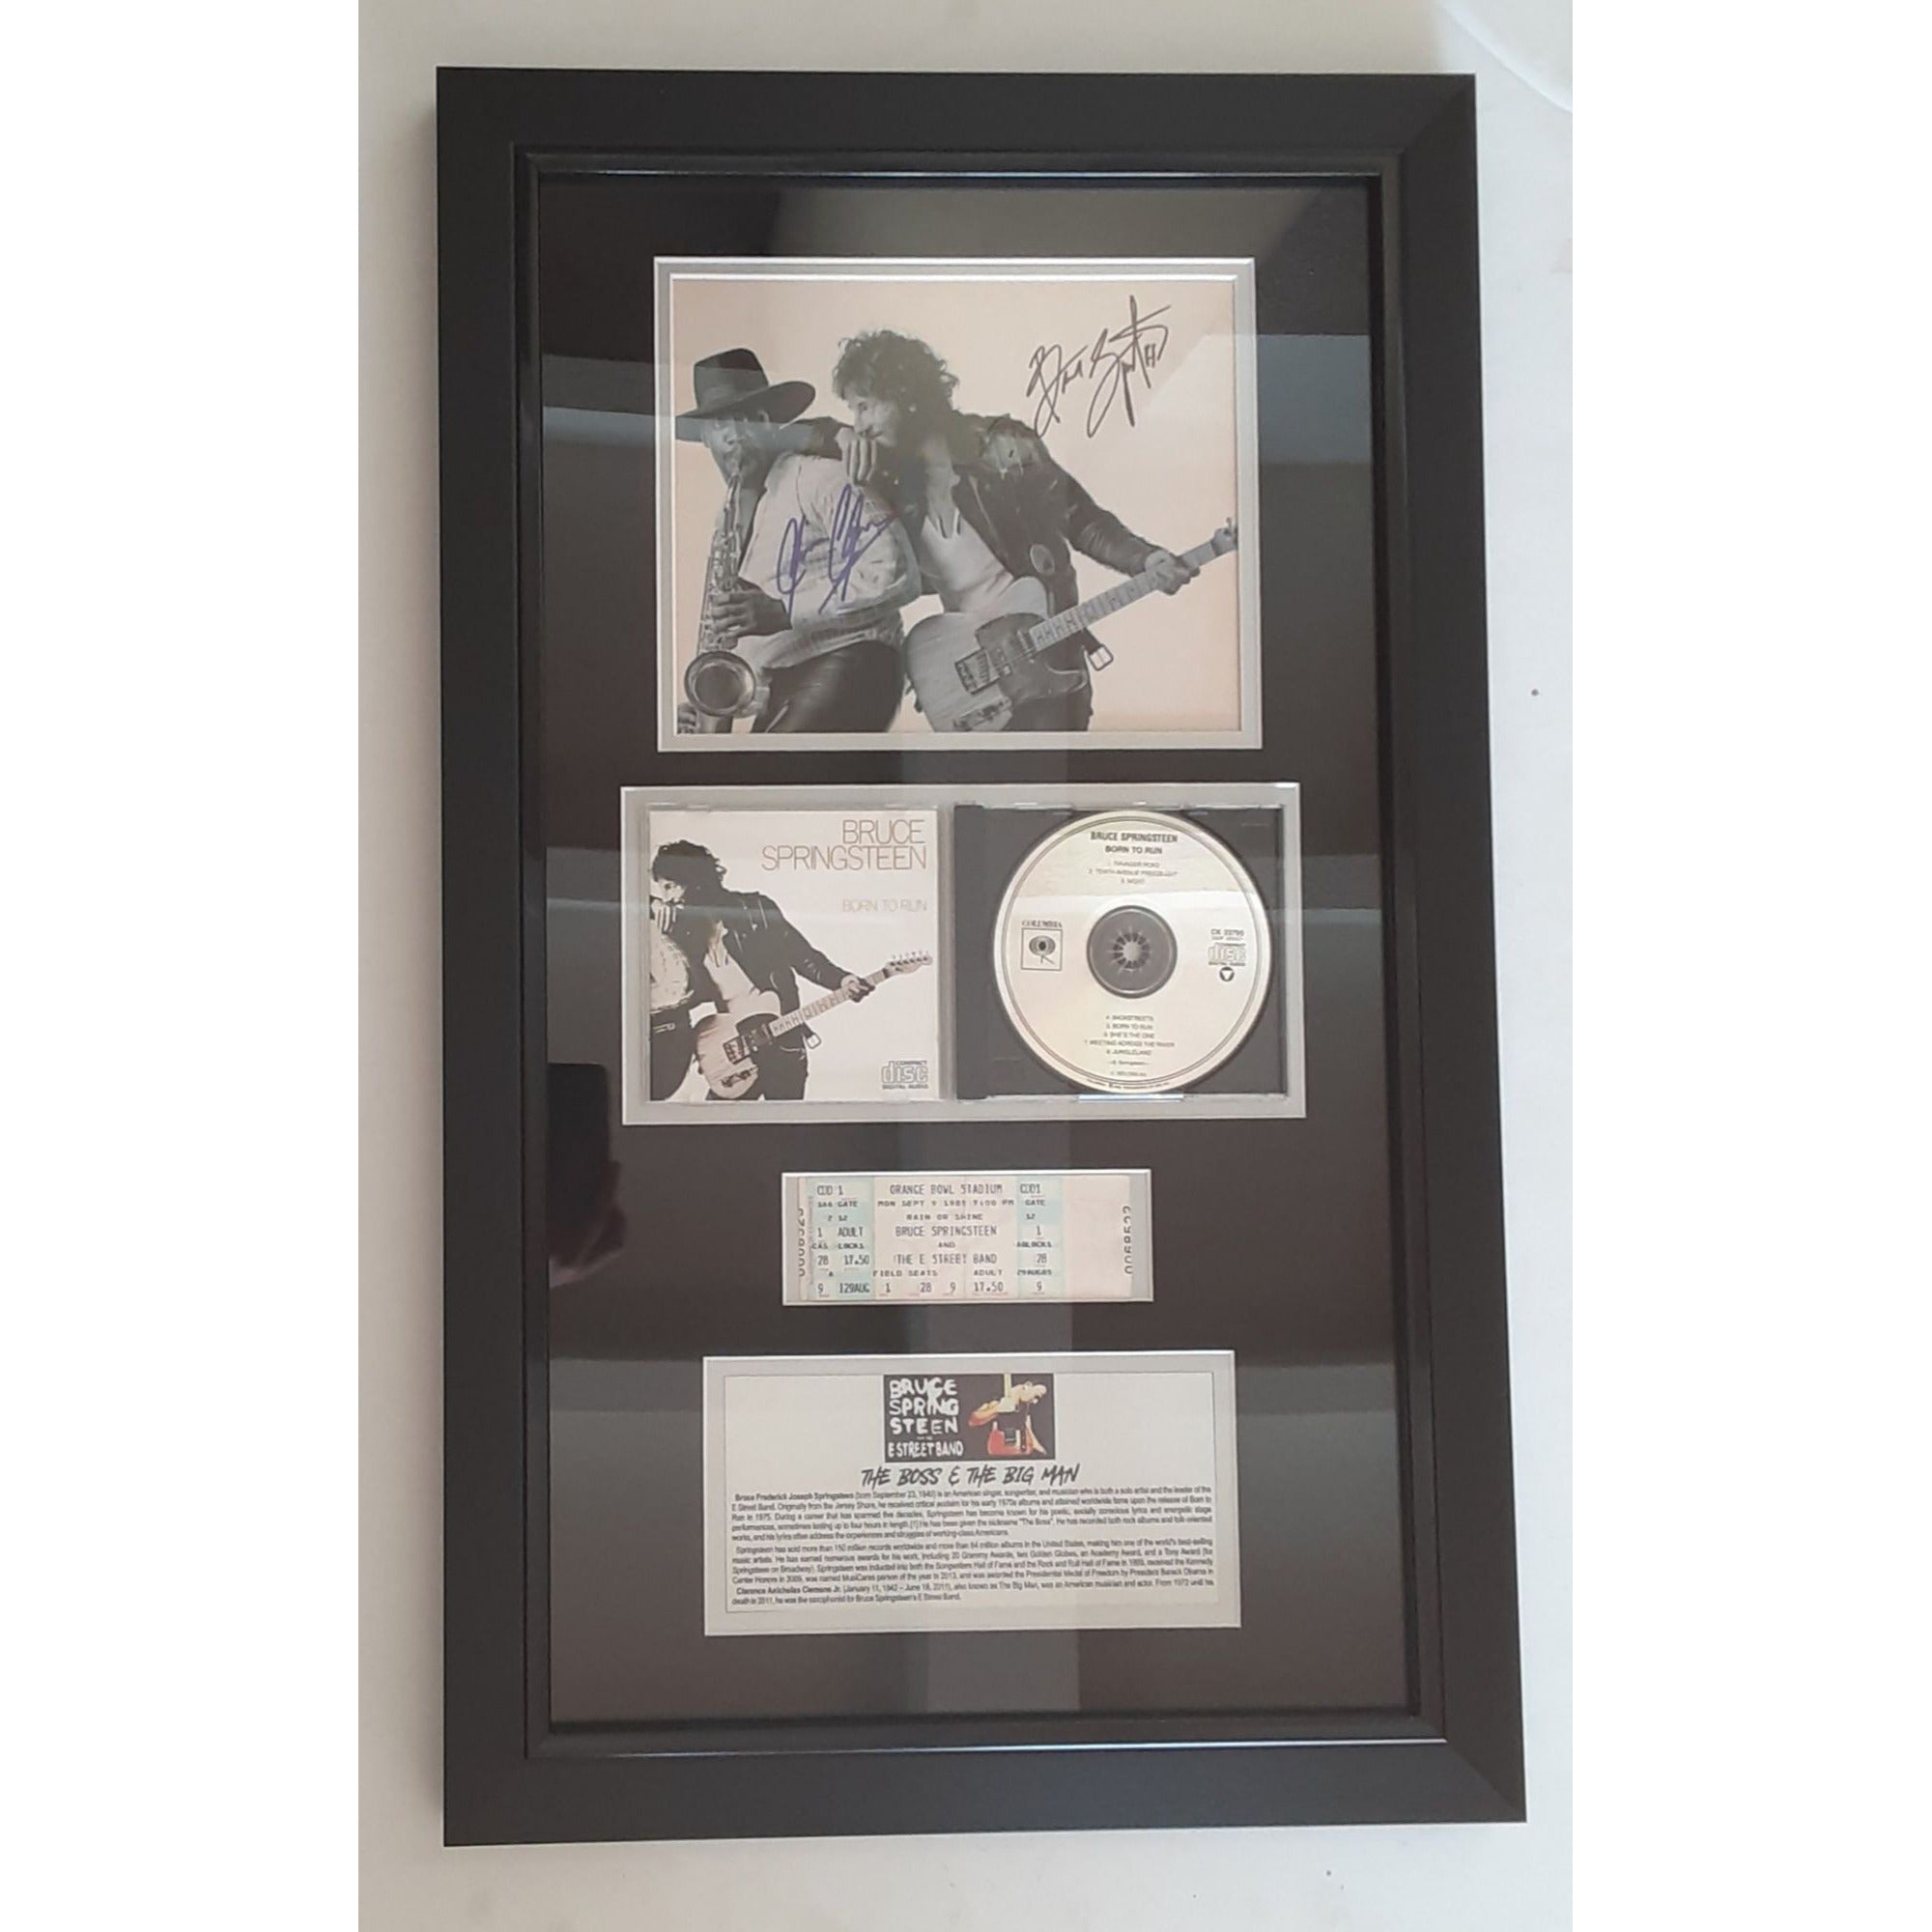 Bruce Springsteen and Clarence Clemons signed and framed with proof